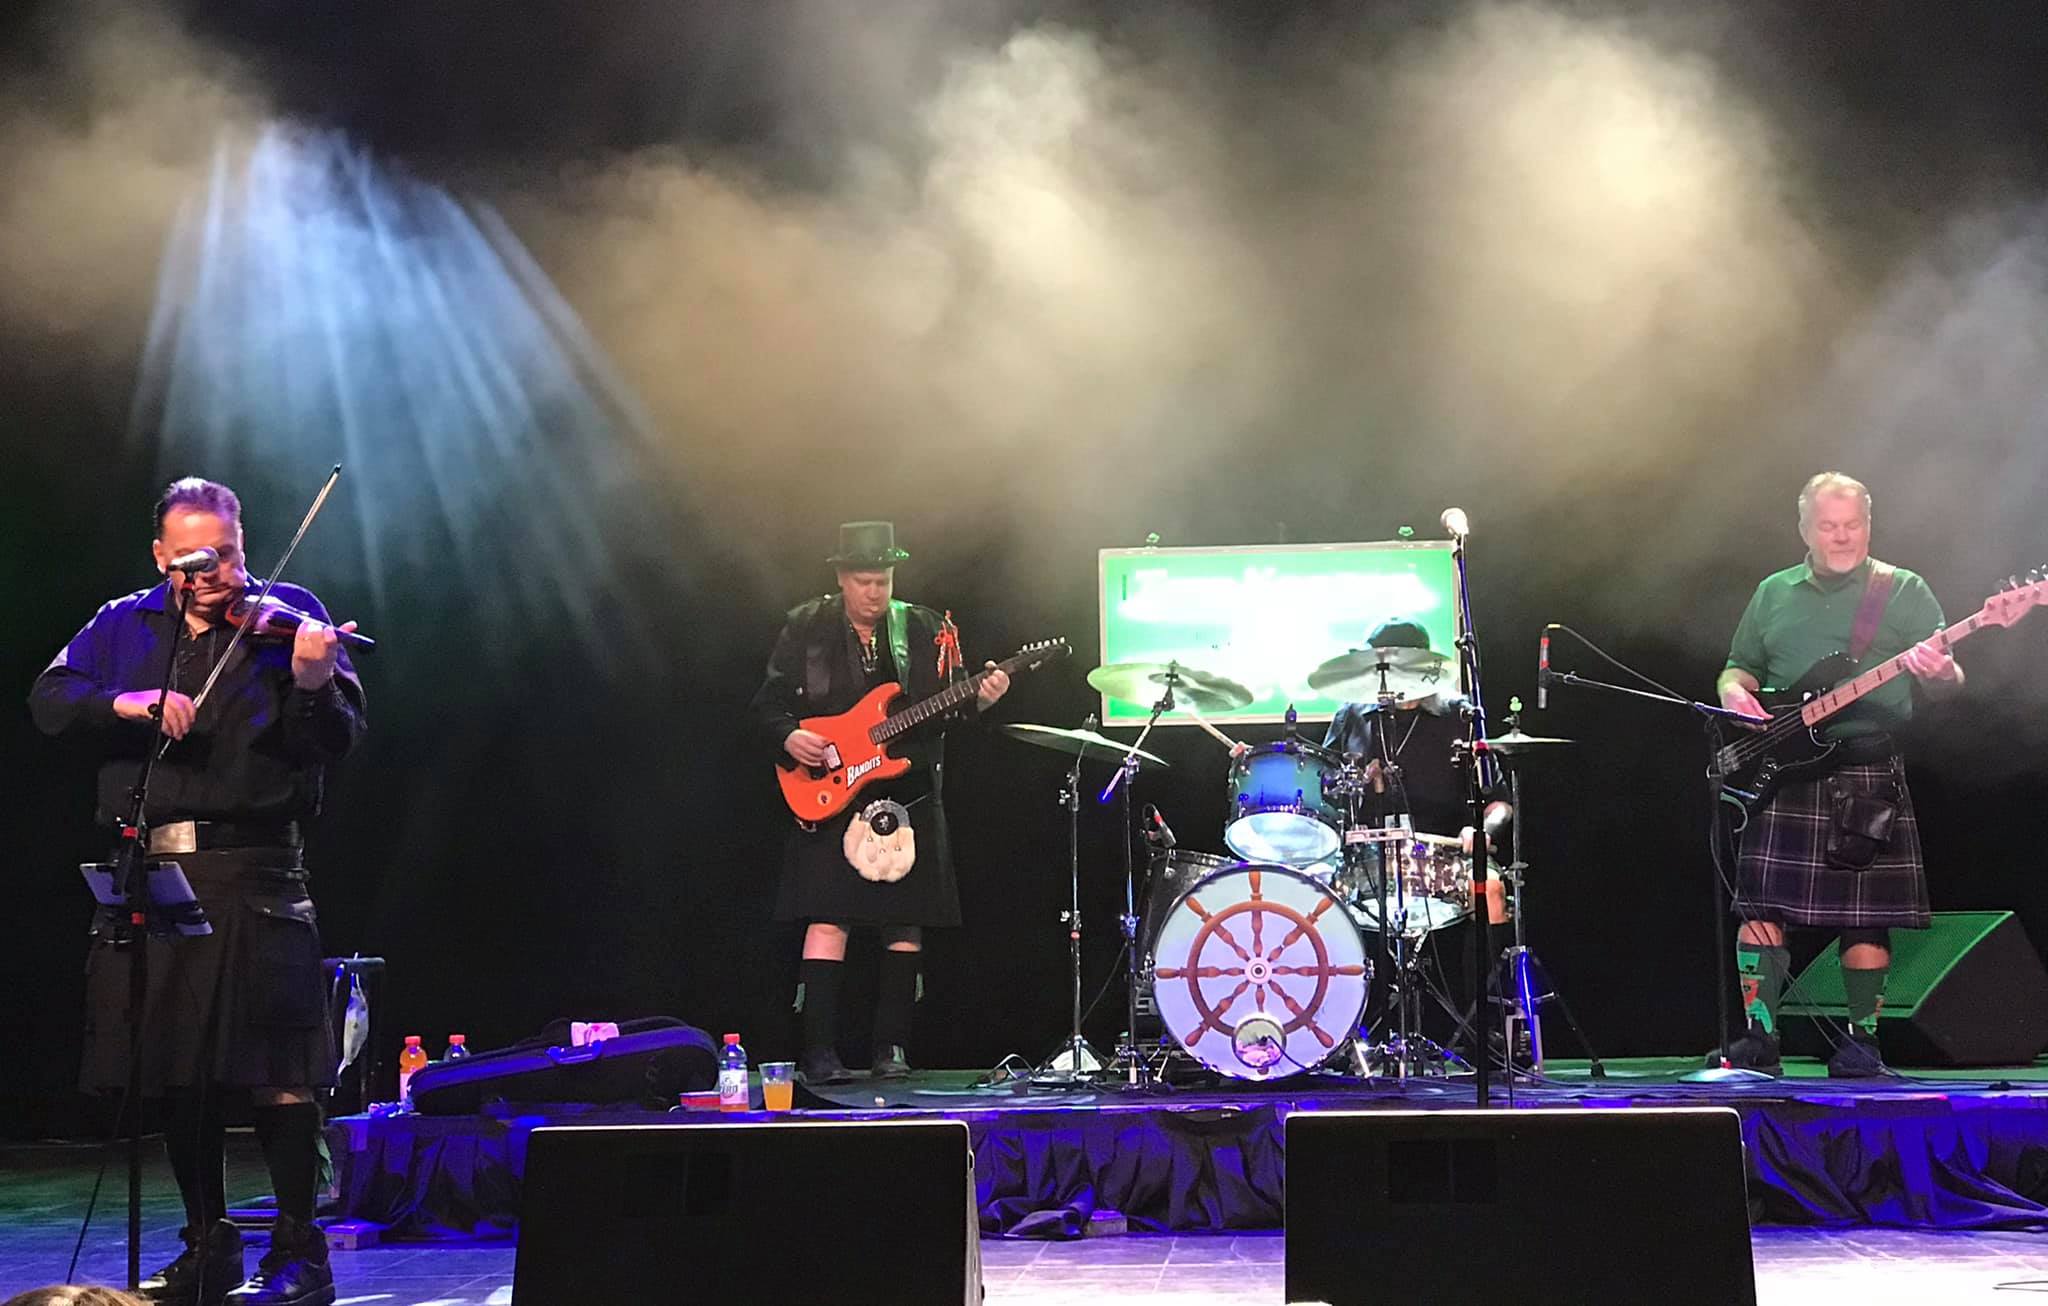 Tom Keefer and Celtic Cross on stage at The Rapids in Niagara Falls. (Photo courtesy of Keefer)